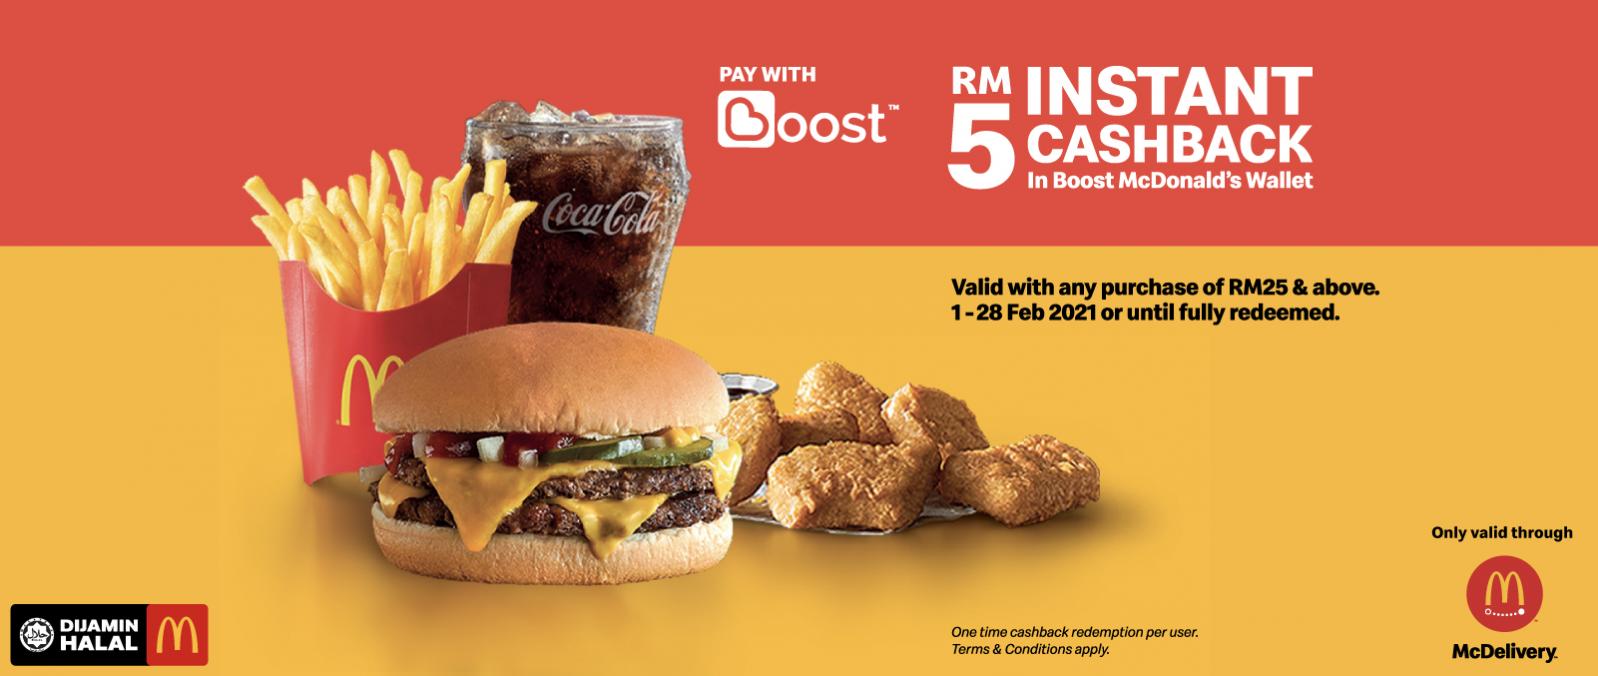 Pay with Boost RM5 Instant Cashback's image'